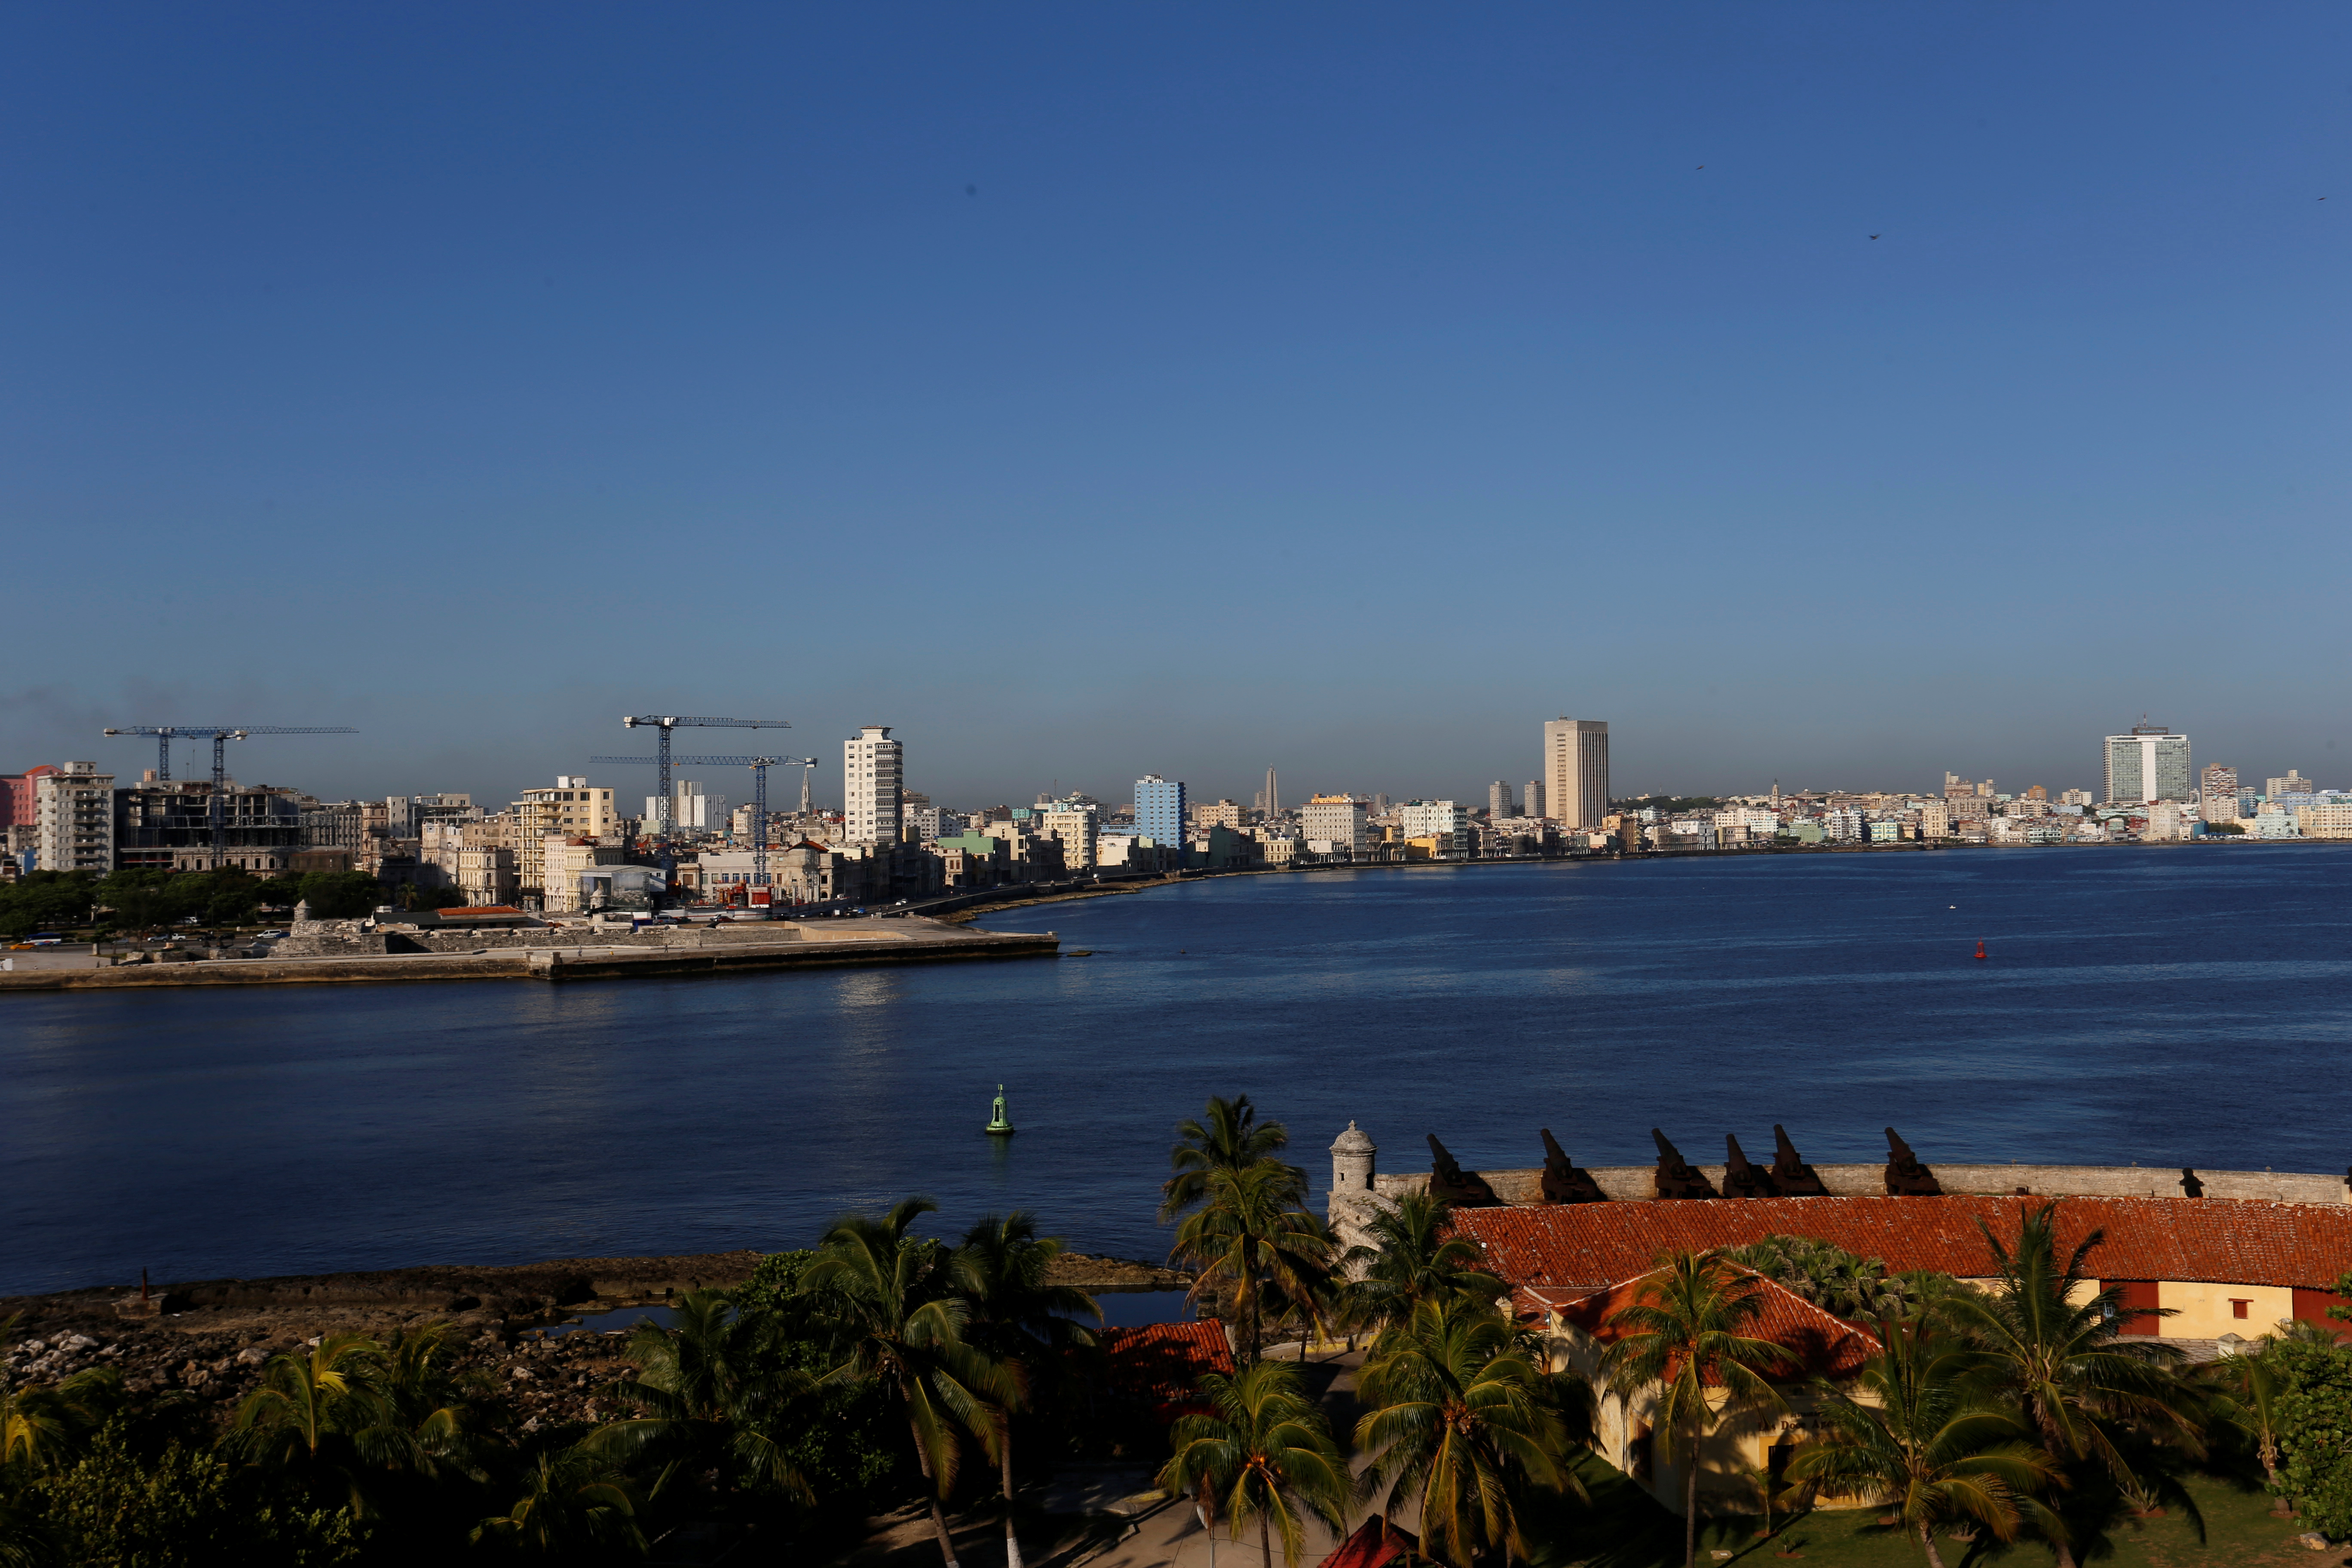 Cranes dot the skyline as the building of luxury hotels and the renovation of historic buildings are underway, in Havana